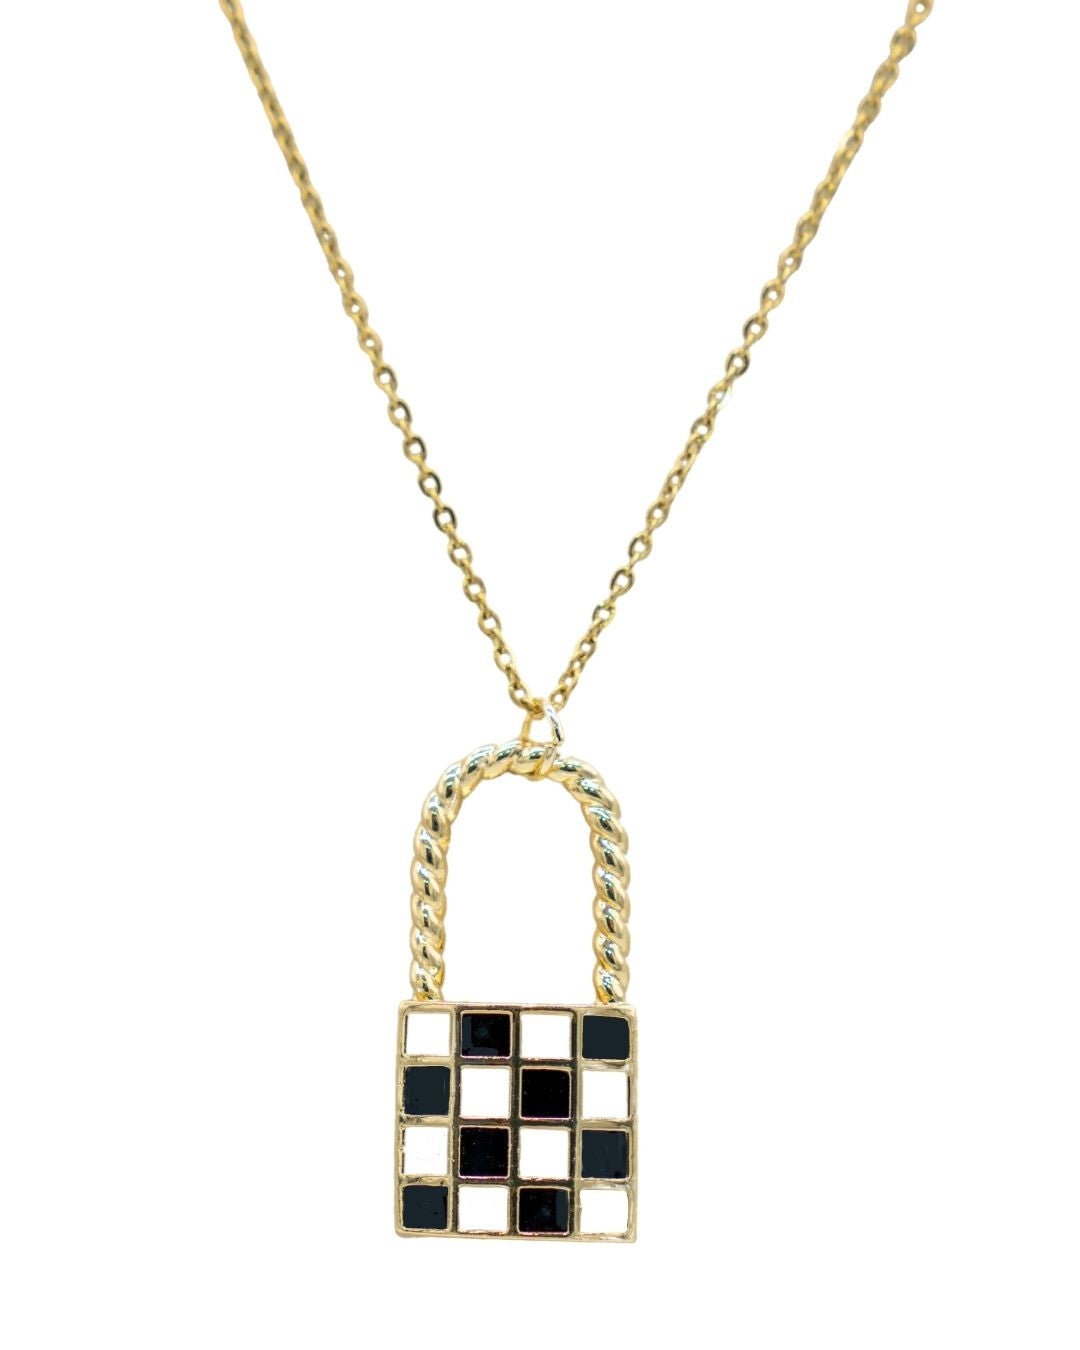 Checkered Charm Necklaces